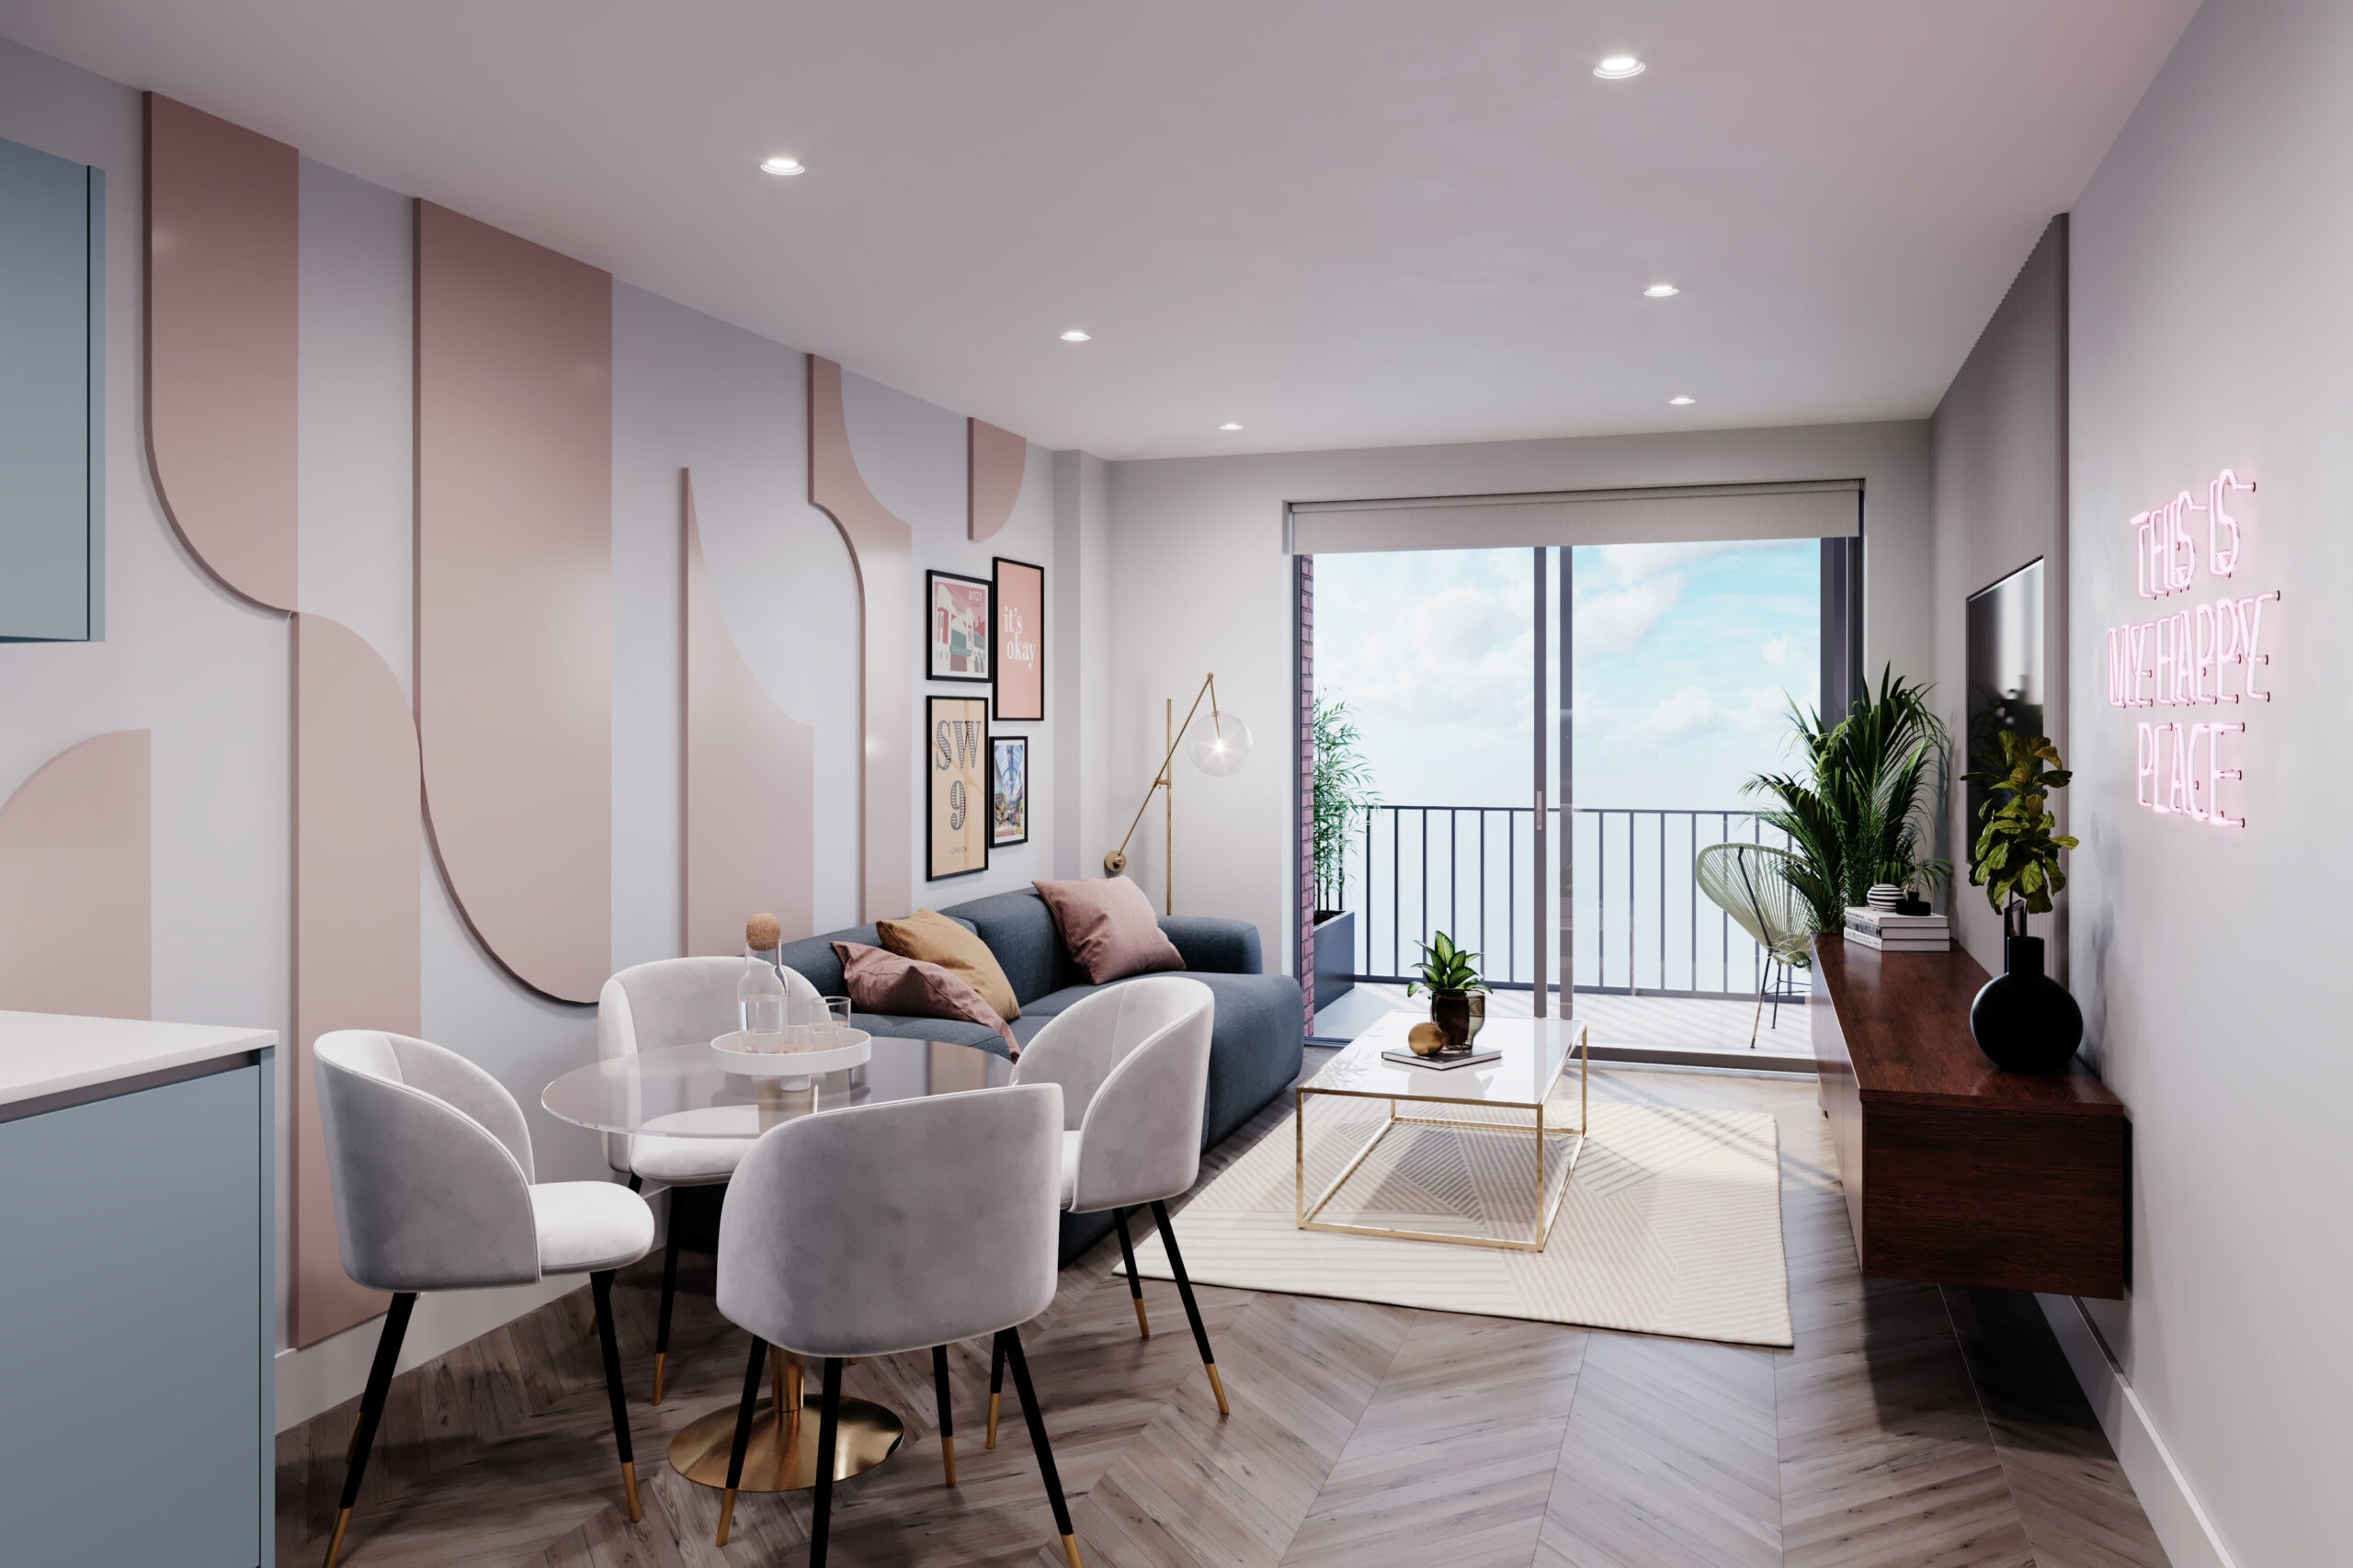 An image of a living room at Notting Hill Genesis' NINE Brixton development - available to purchase through Shared Ownership on Share to Buy!